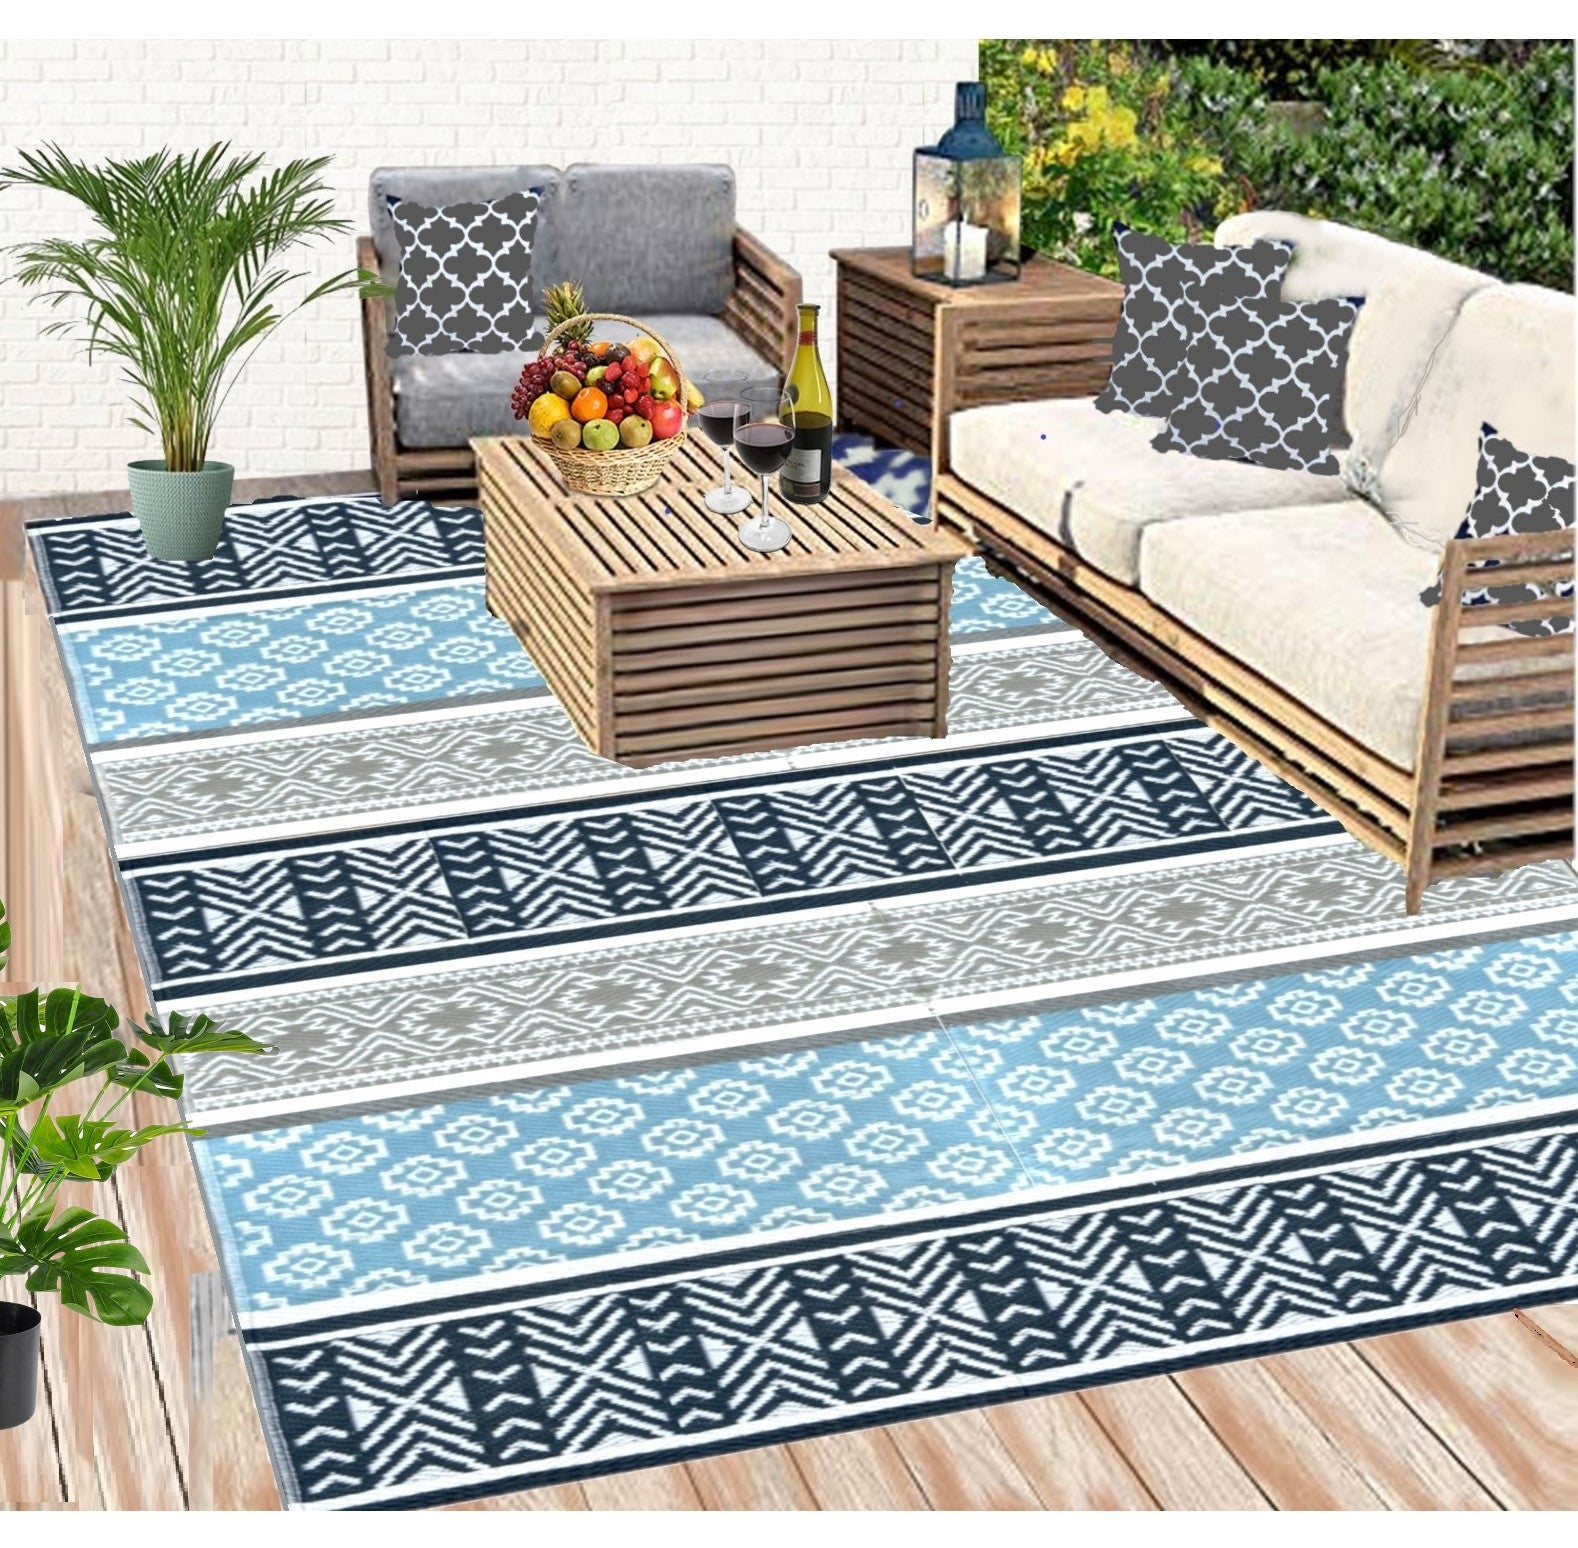 BalajeesUSA Outdoor rugs Plastic straw patio rugs-5 by 7 feet. Grey,Teal reversible mats waterproof rv camper mats patio rugs Clearance 7001 - image 2 of 9